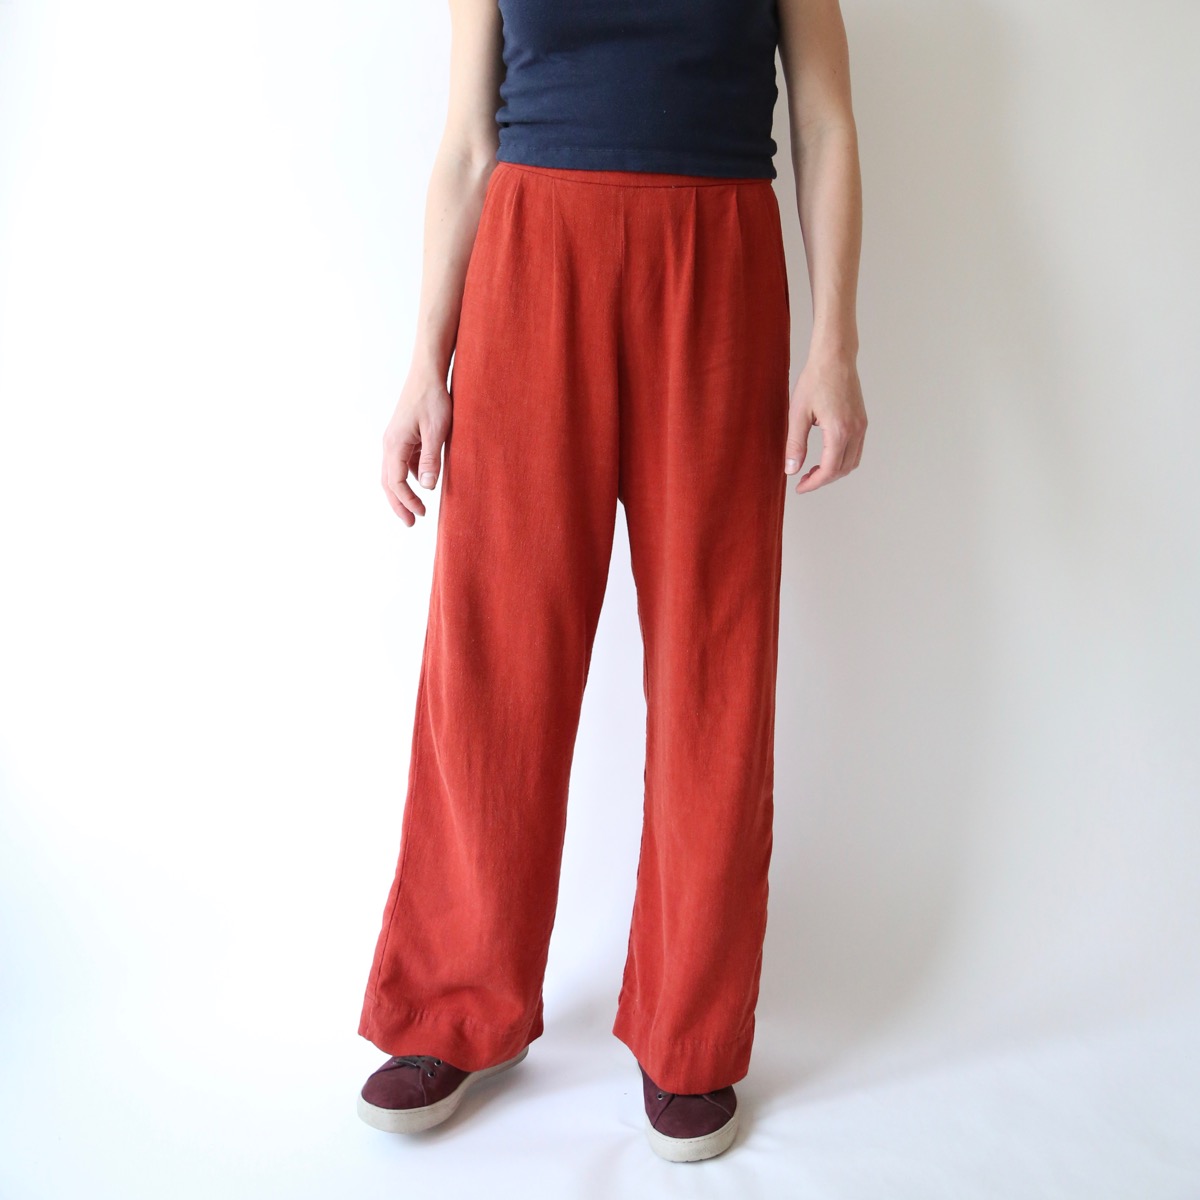 Rose Pants In Viscose Linen Made By Rae,What Is Bacon Aioli